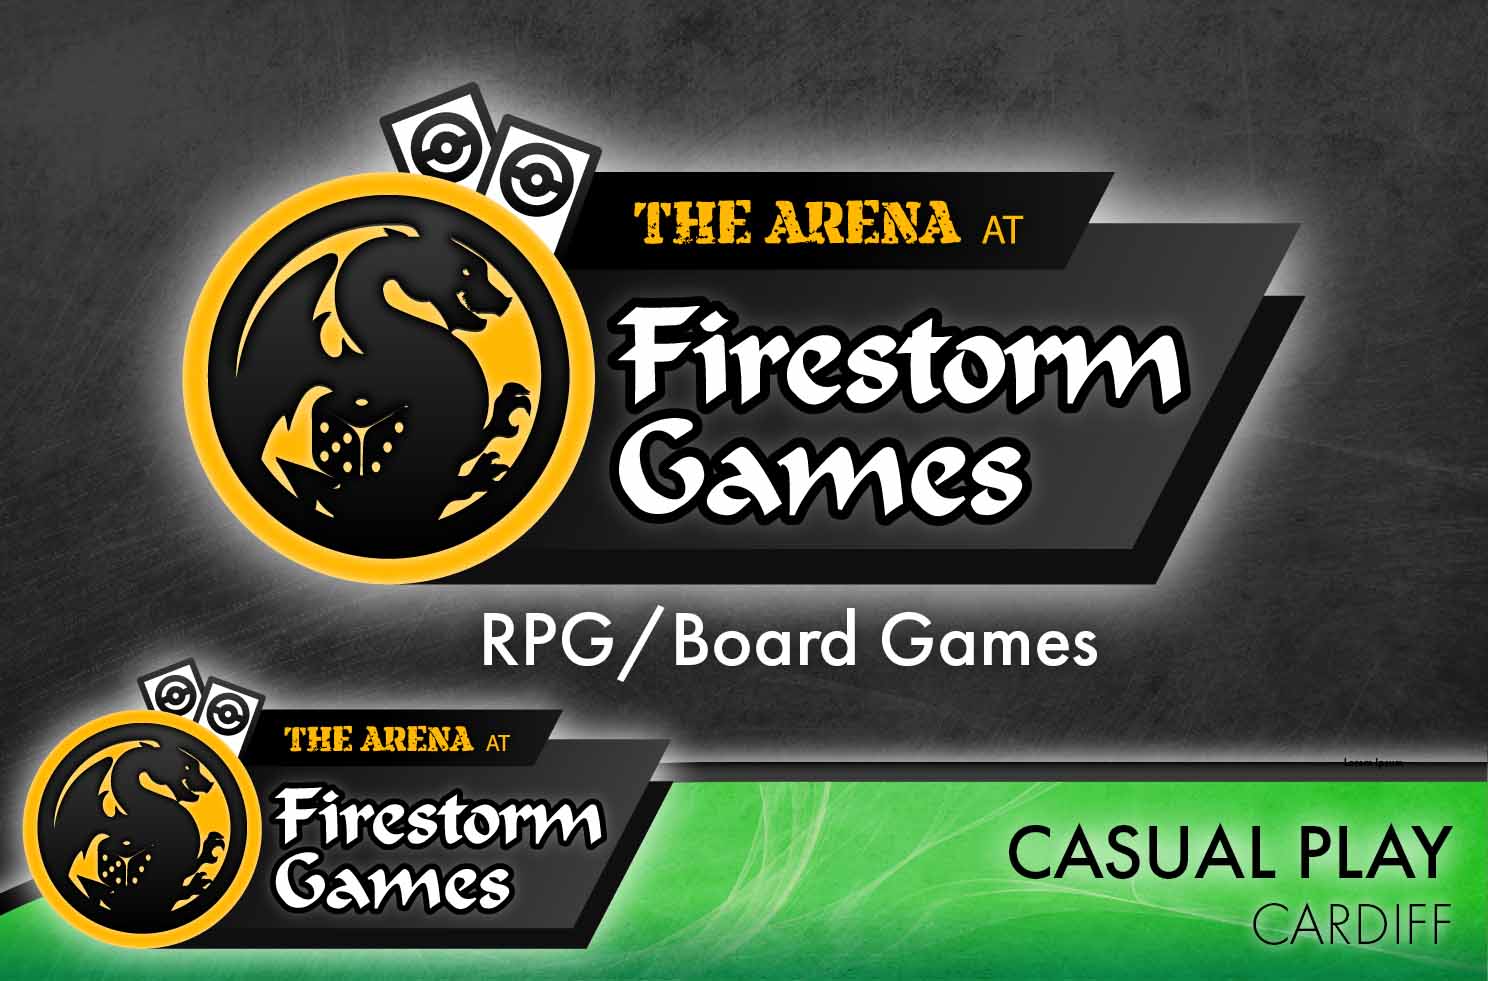 The Arena Thursday RPG/Board Game Ticket